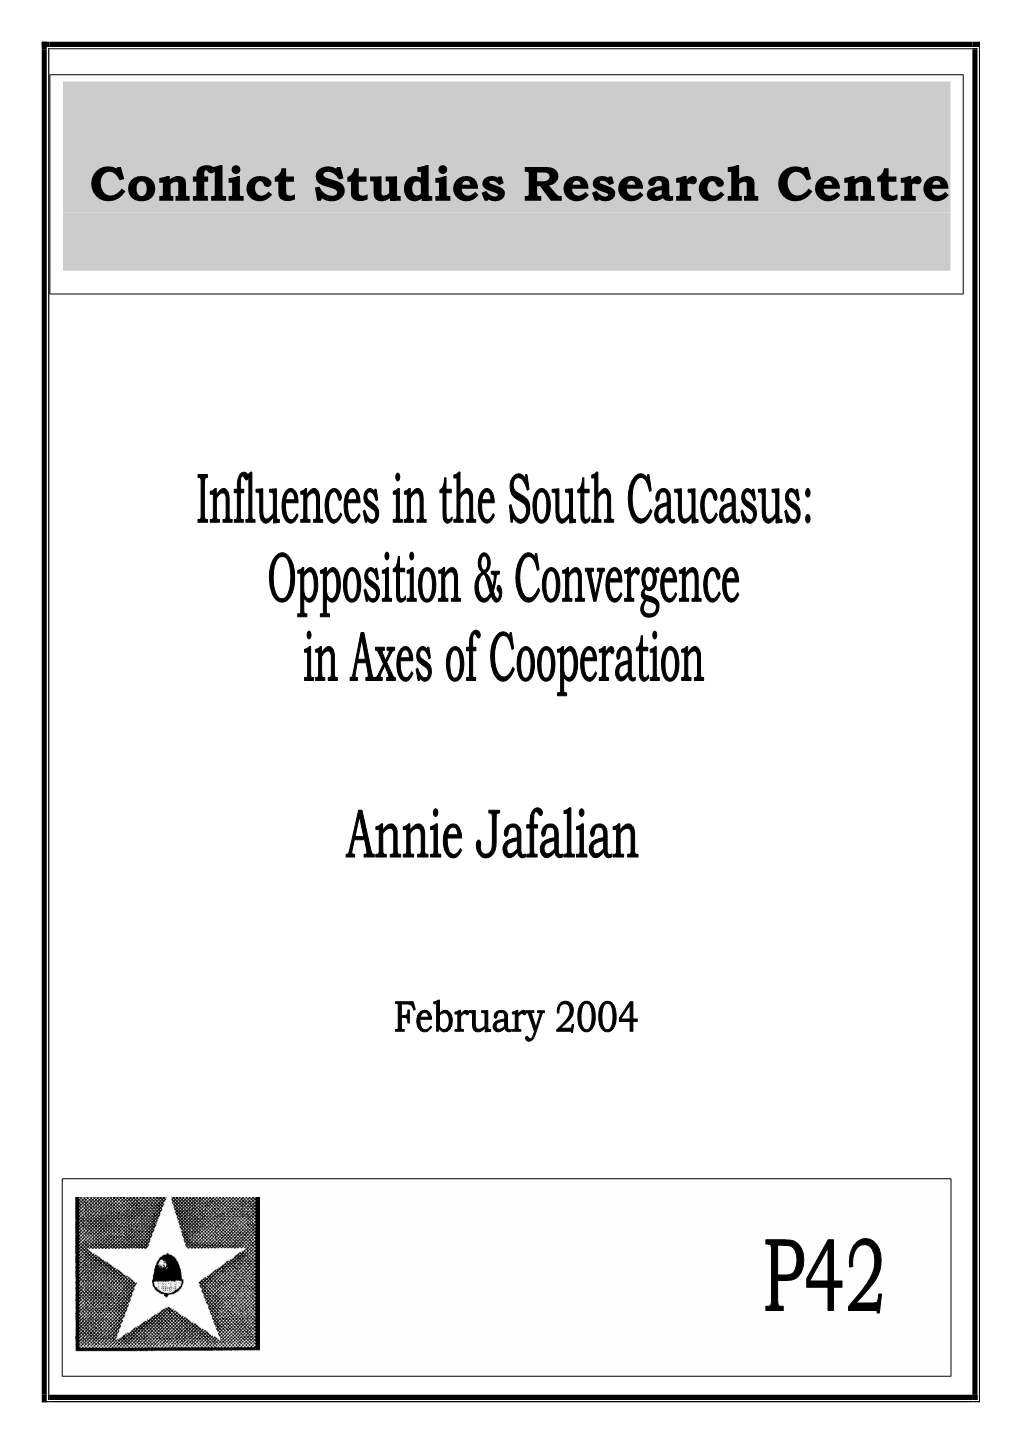 Influences in the South Caucasus: Opposition & Convergence in Axes